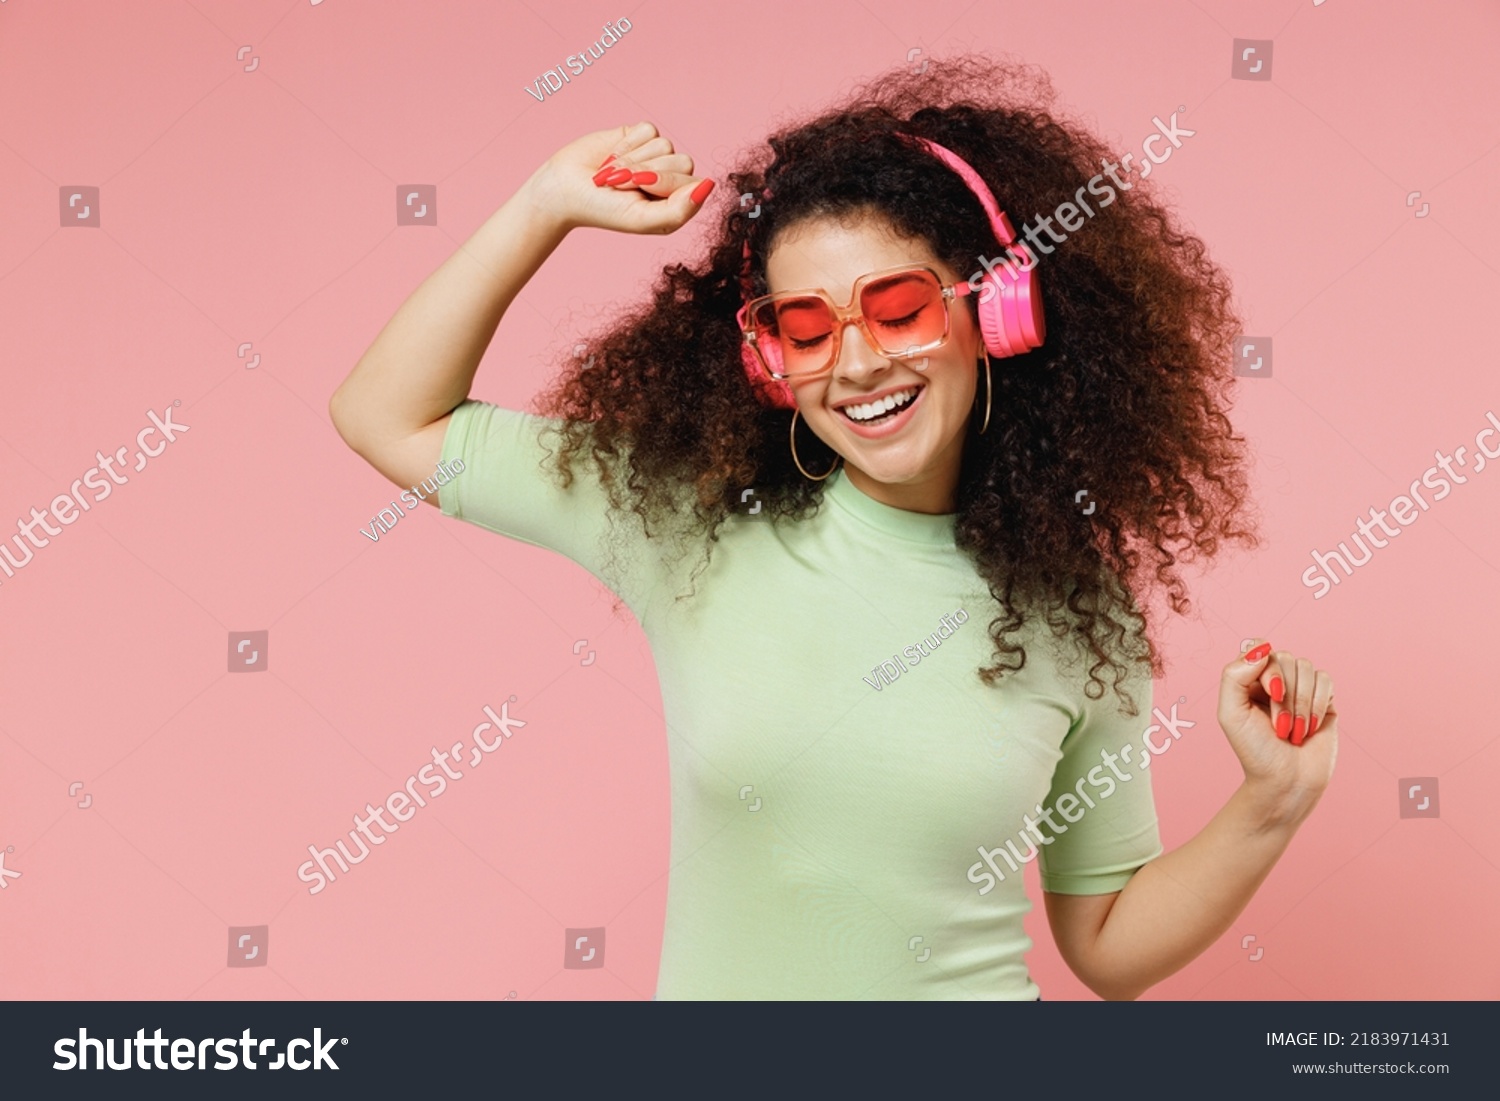 Bright fun young curly latin woman 20s wears mint t-shirt sunglasses listen music in headphones dance have fun rest relax fooling around isolated on plain pastel light pink background studio portrait #2183971431